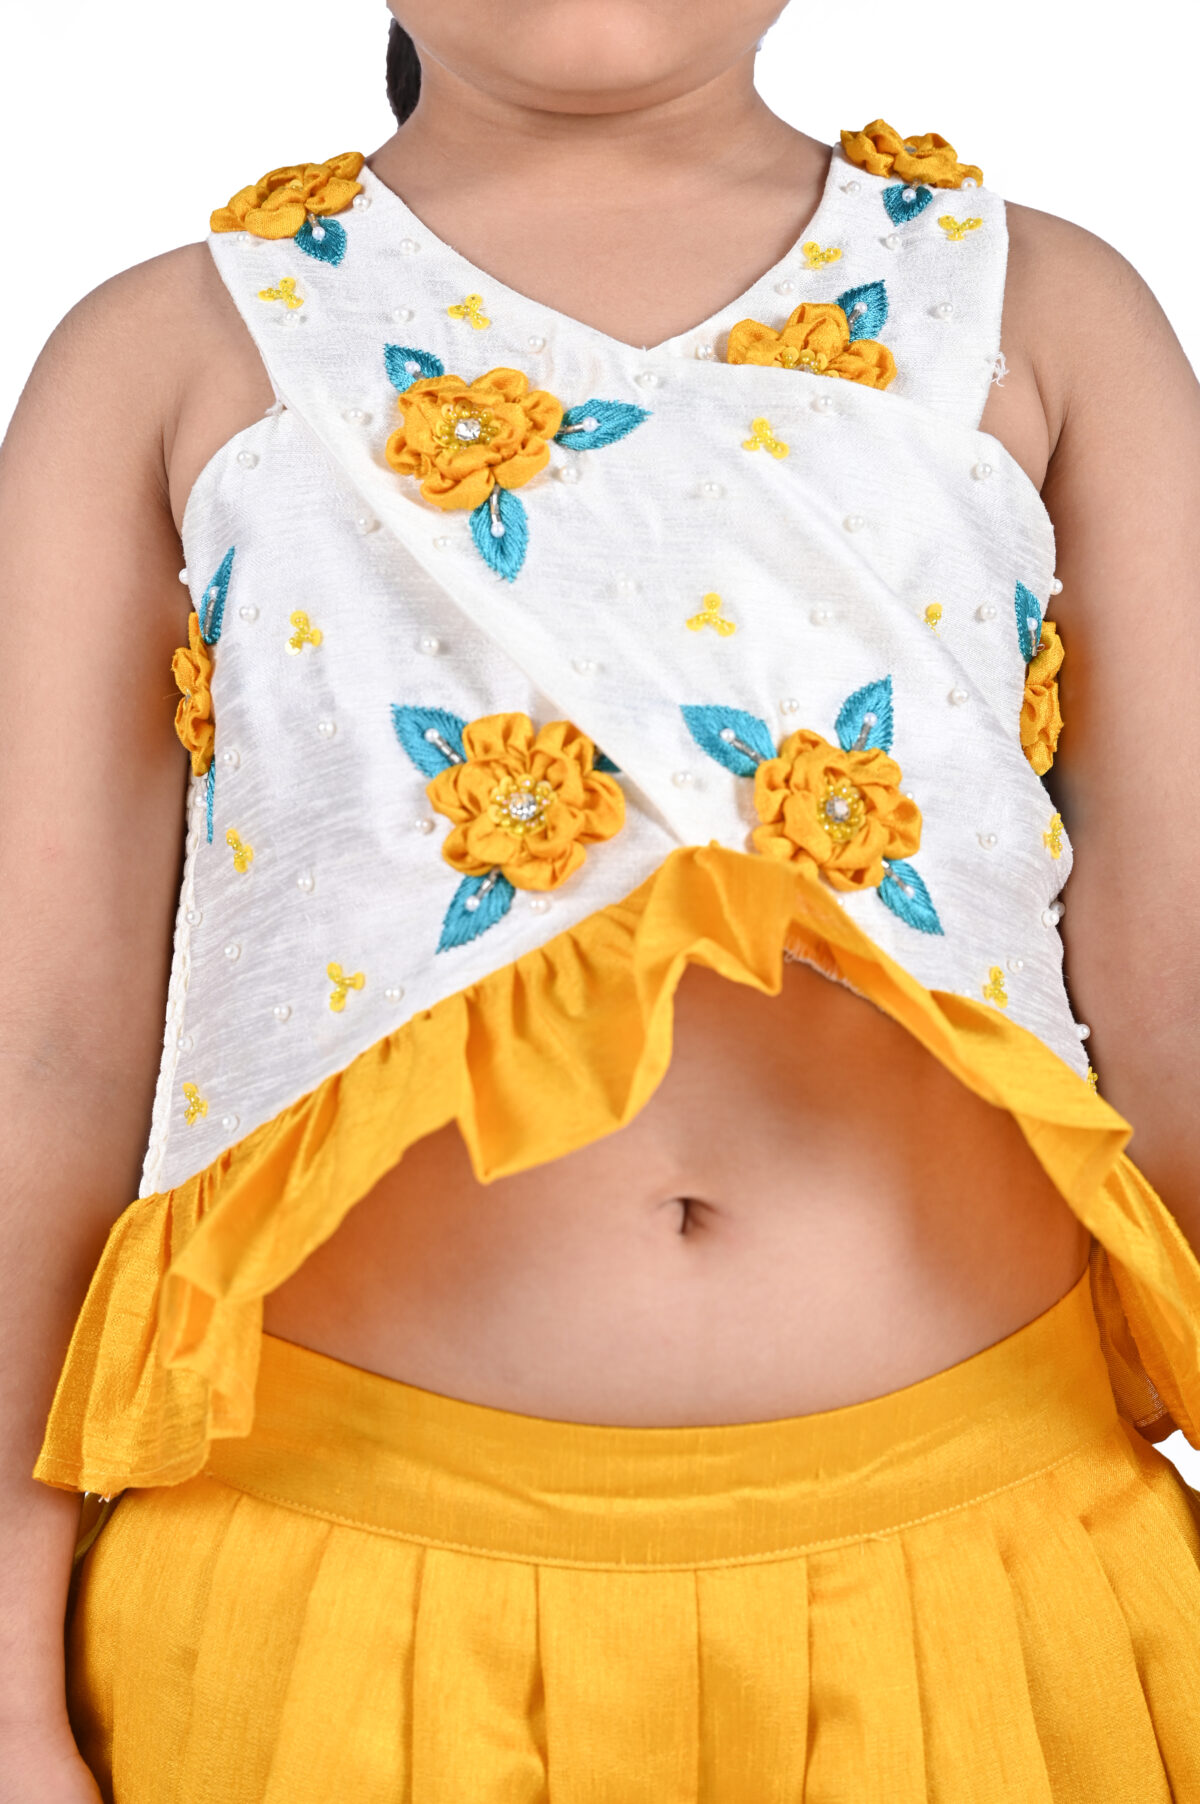 DSC 4723 copy scaled Criss Cross Style Top With Dhoti- Yellow & White